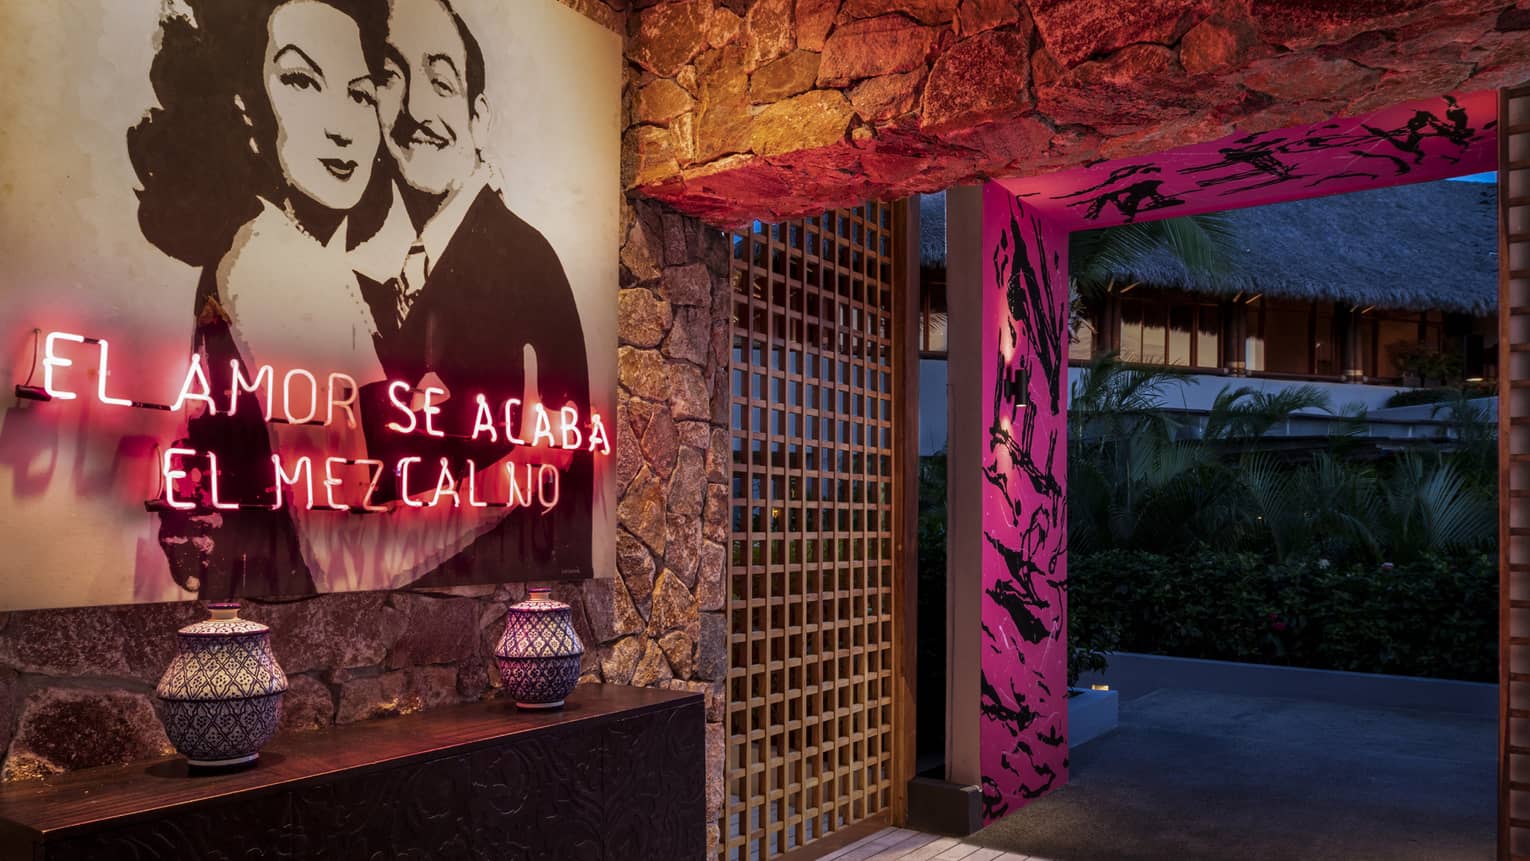 The interior entrance of a bar with a photo of a man and woman hugging and pink lighting.